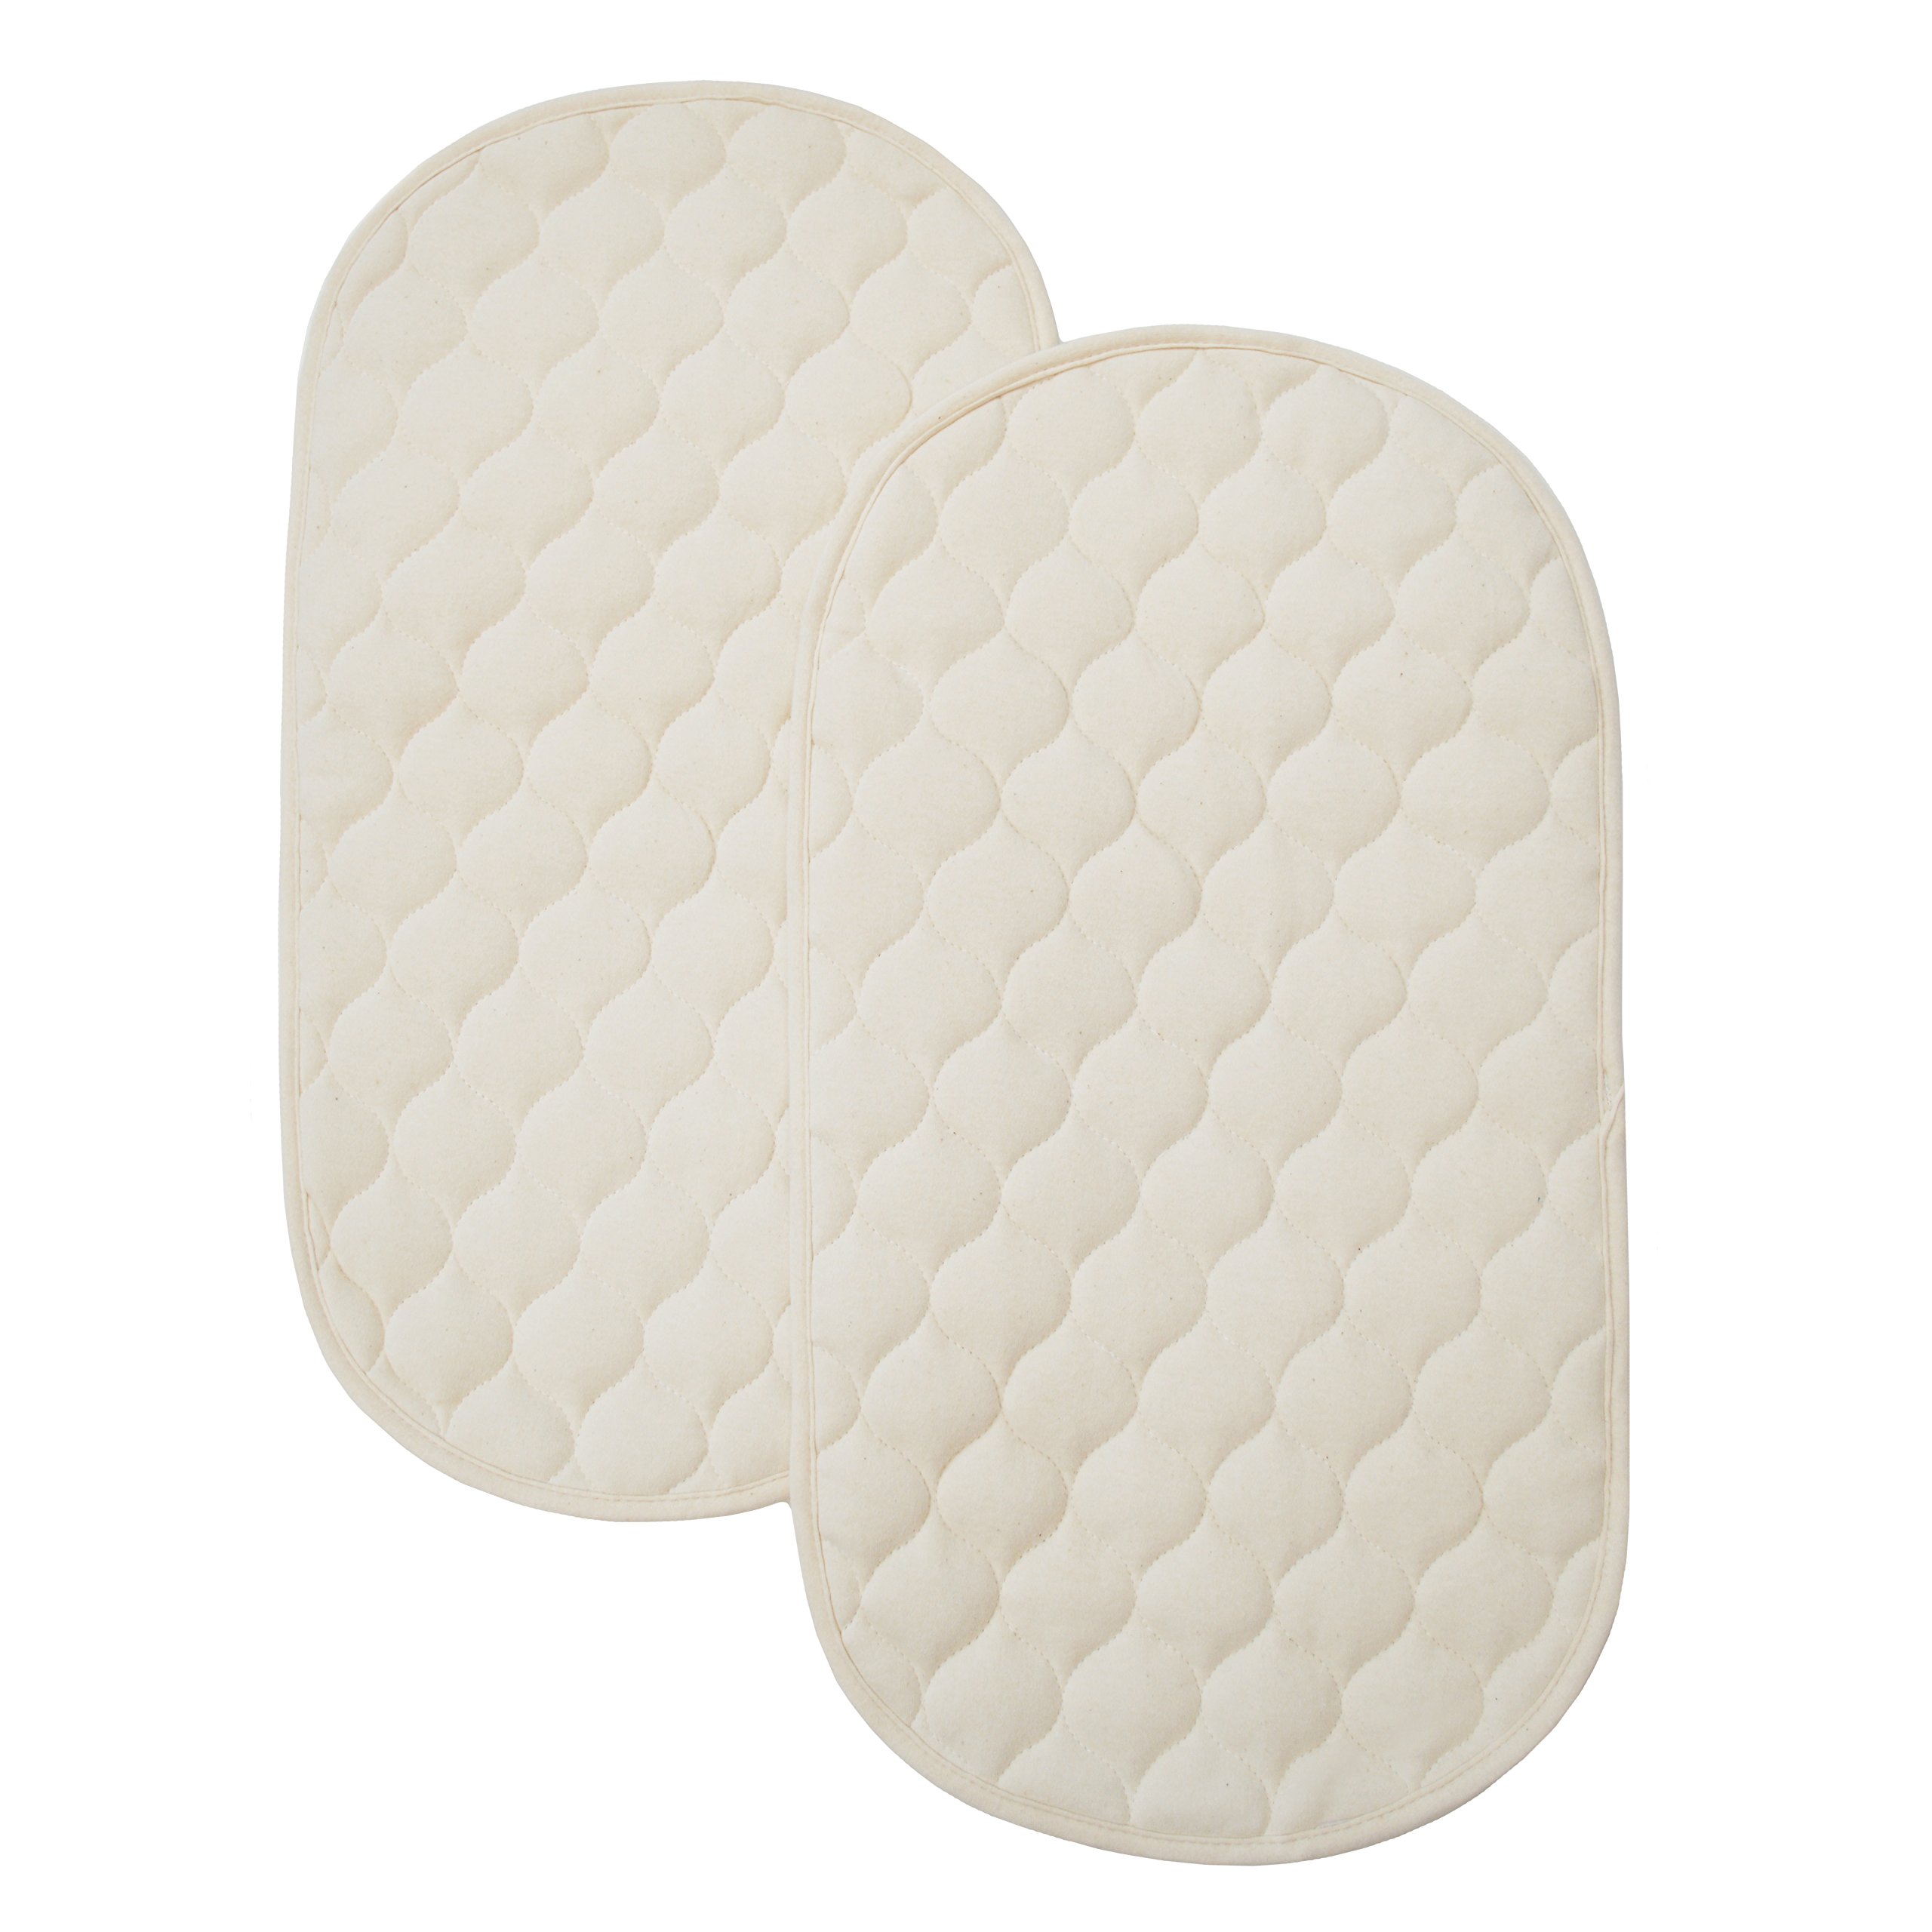 TL Care Waterproof Quilted Playard Changing Table Pads Burp Cloth Made with Organic Cotton 2-Count Natural Color